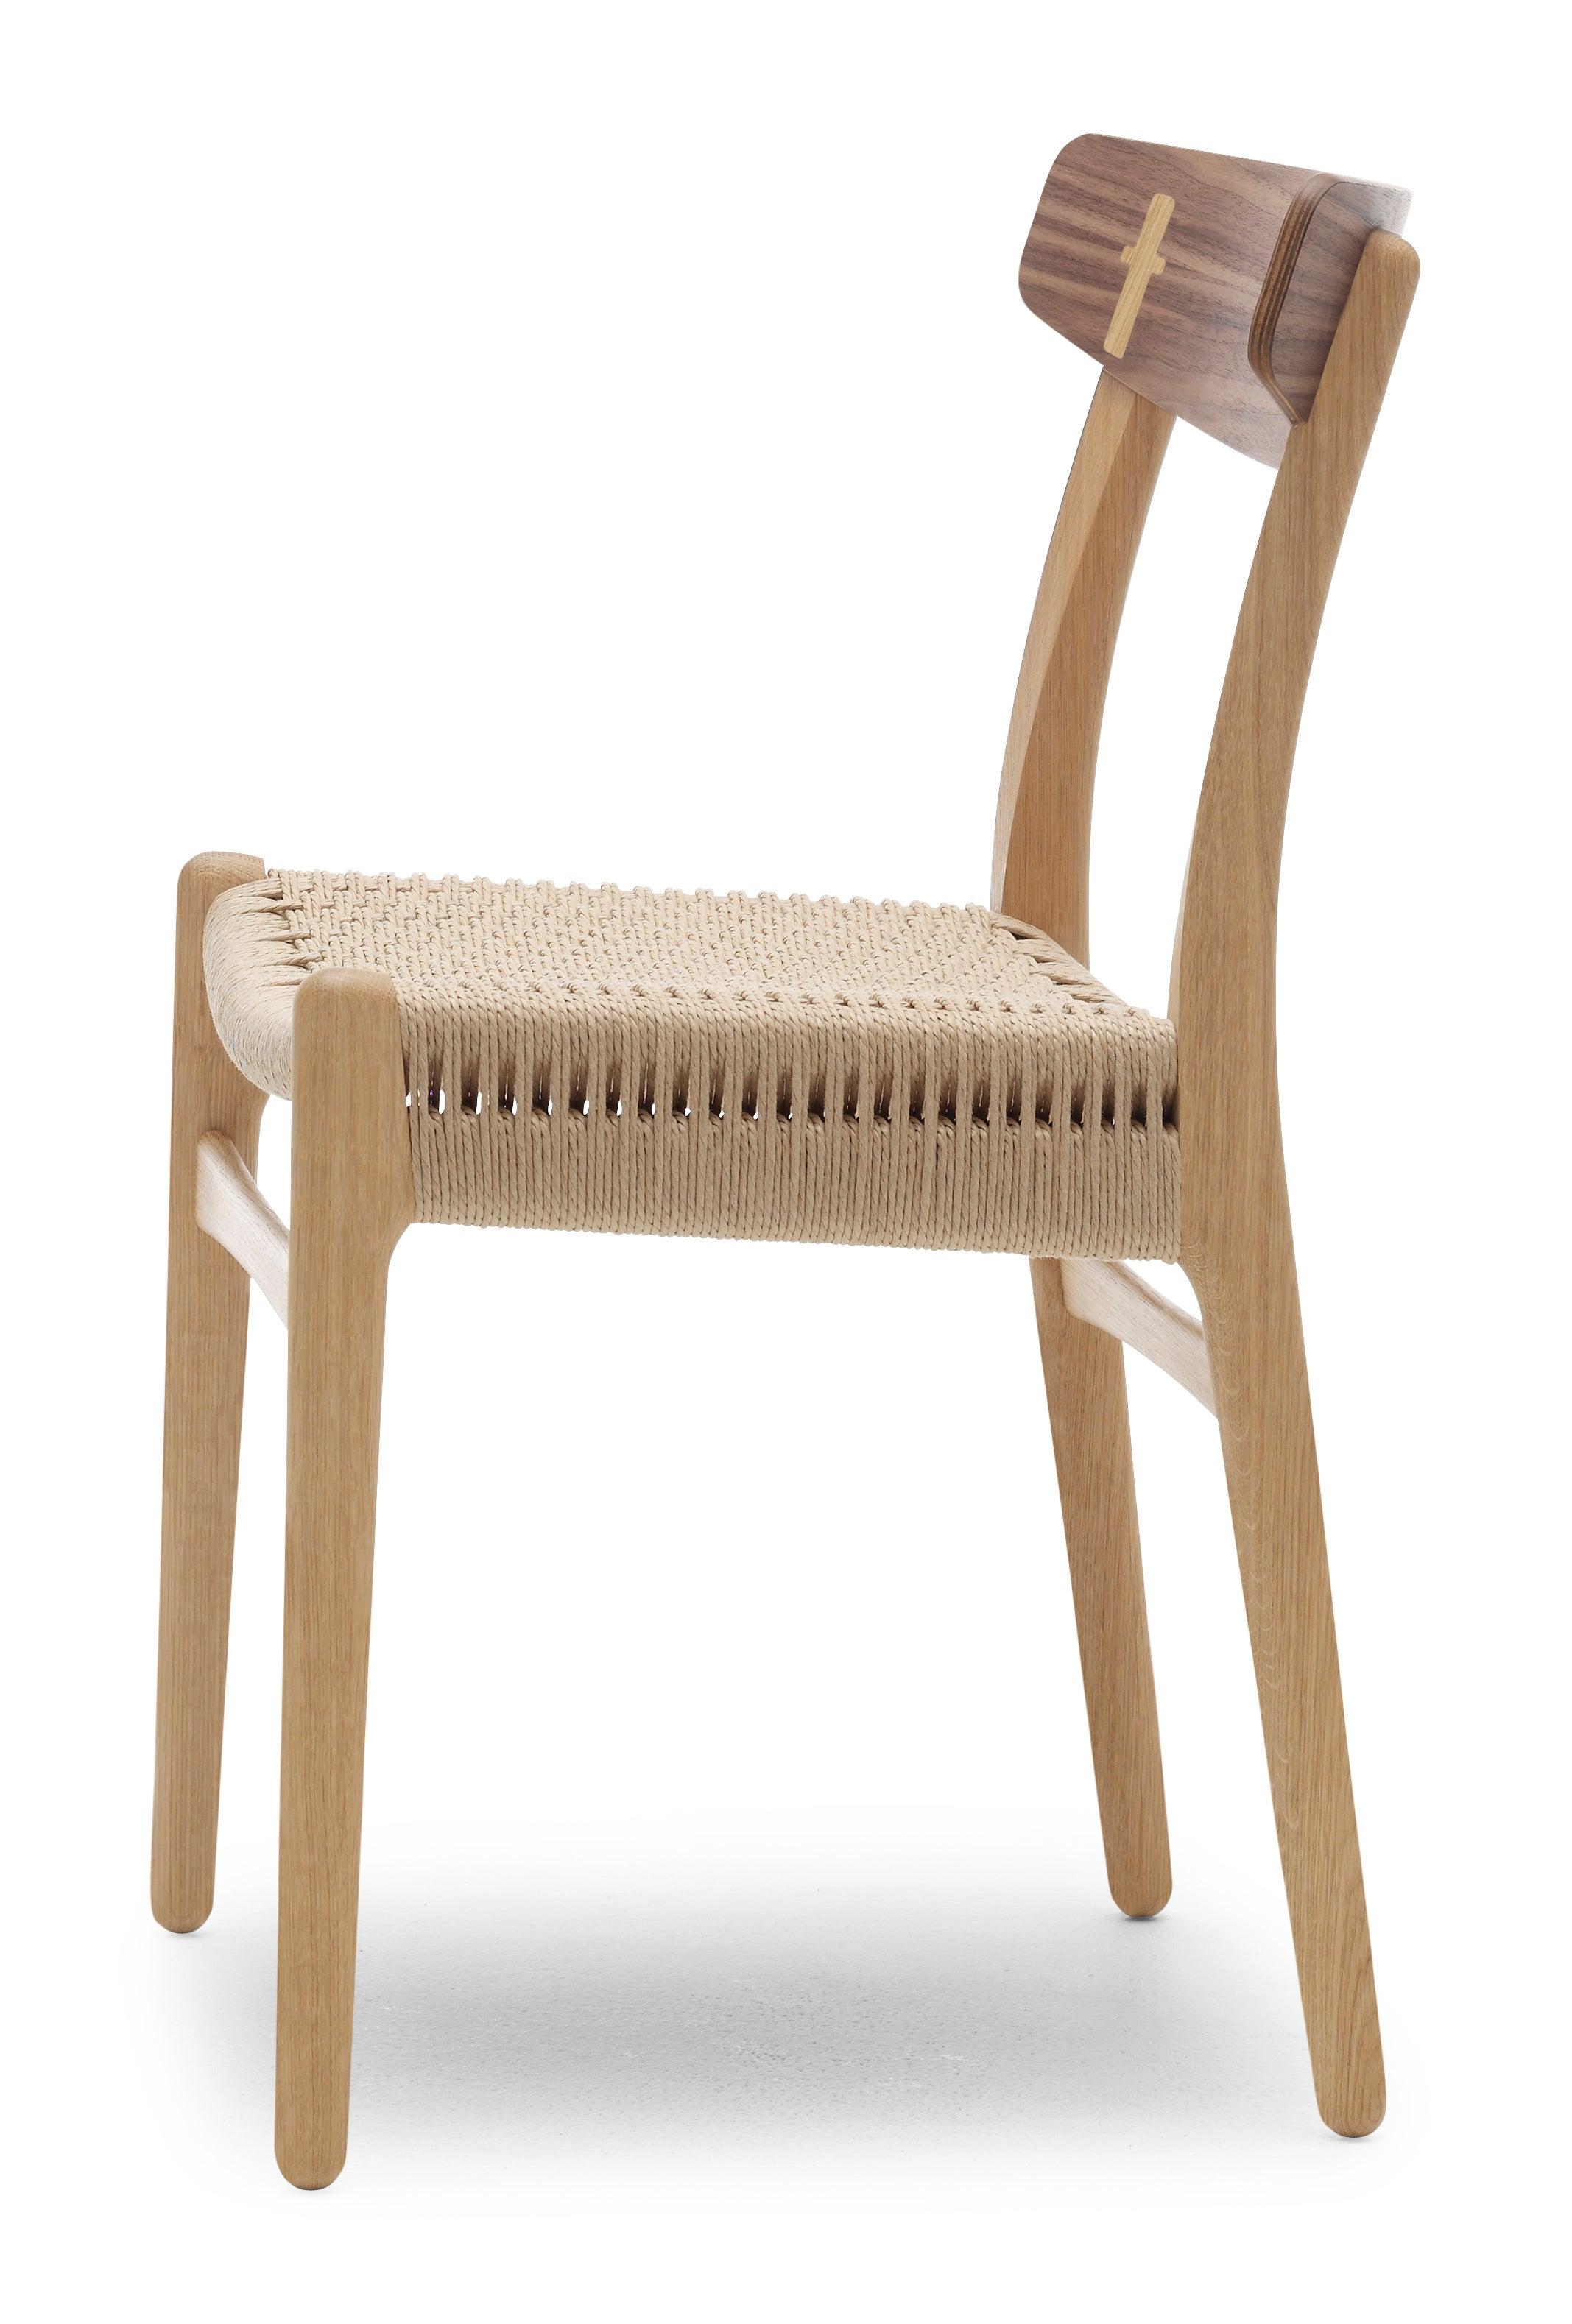 The CH23 dining chair was one of the first chairs Hans J. Wegner designed for Carl Hansen & SÃ¸n in 1950. The first masterpieces he created were not only unique, but also set new standards for modern furniture design with their lightness, artistic